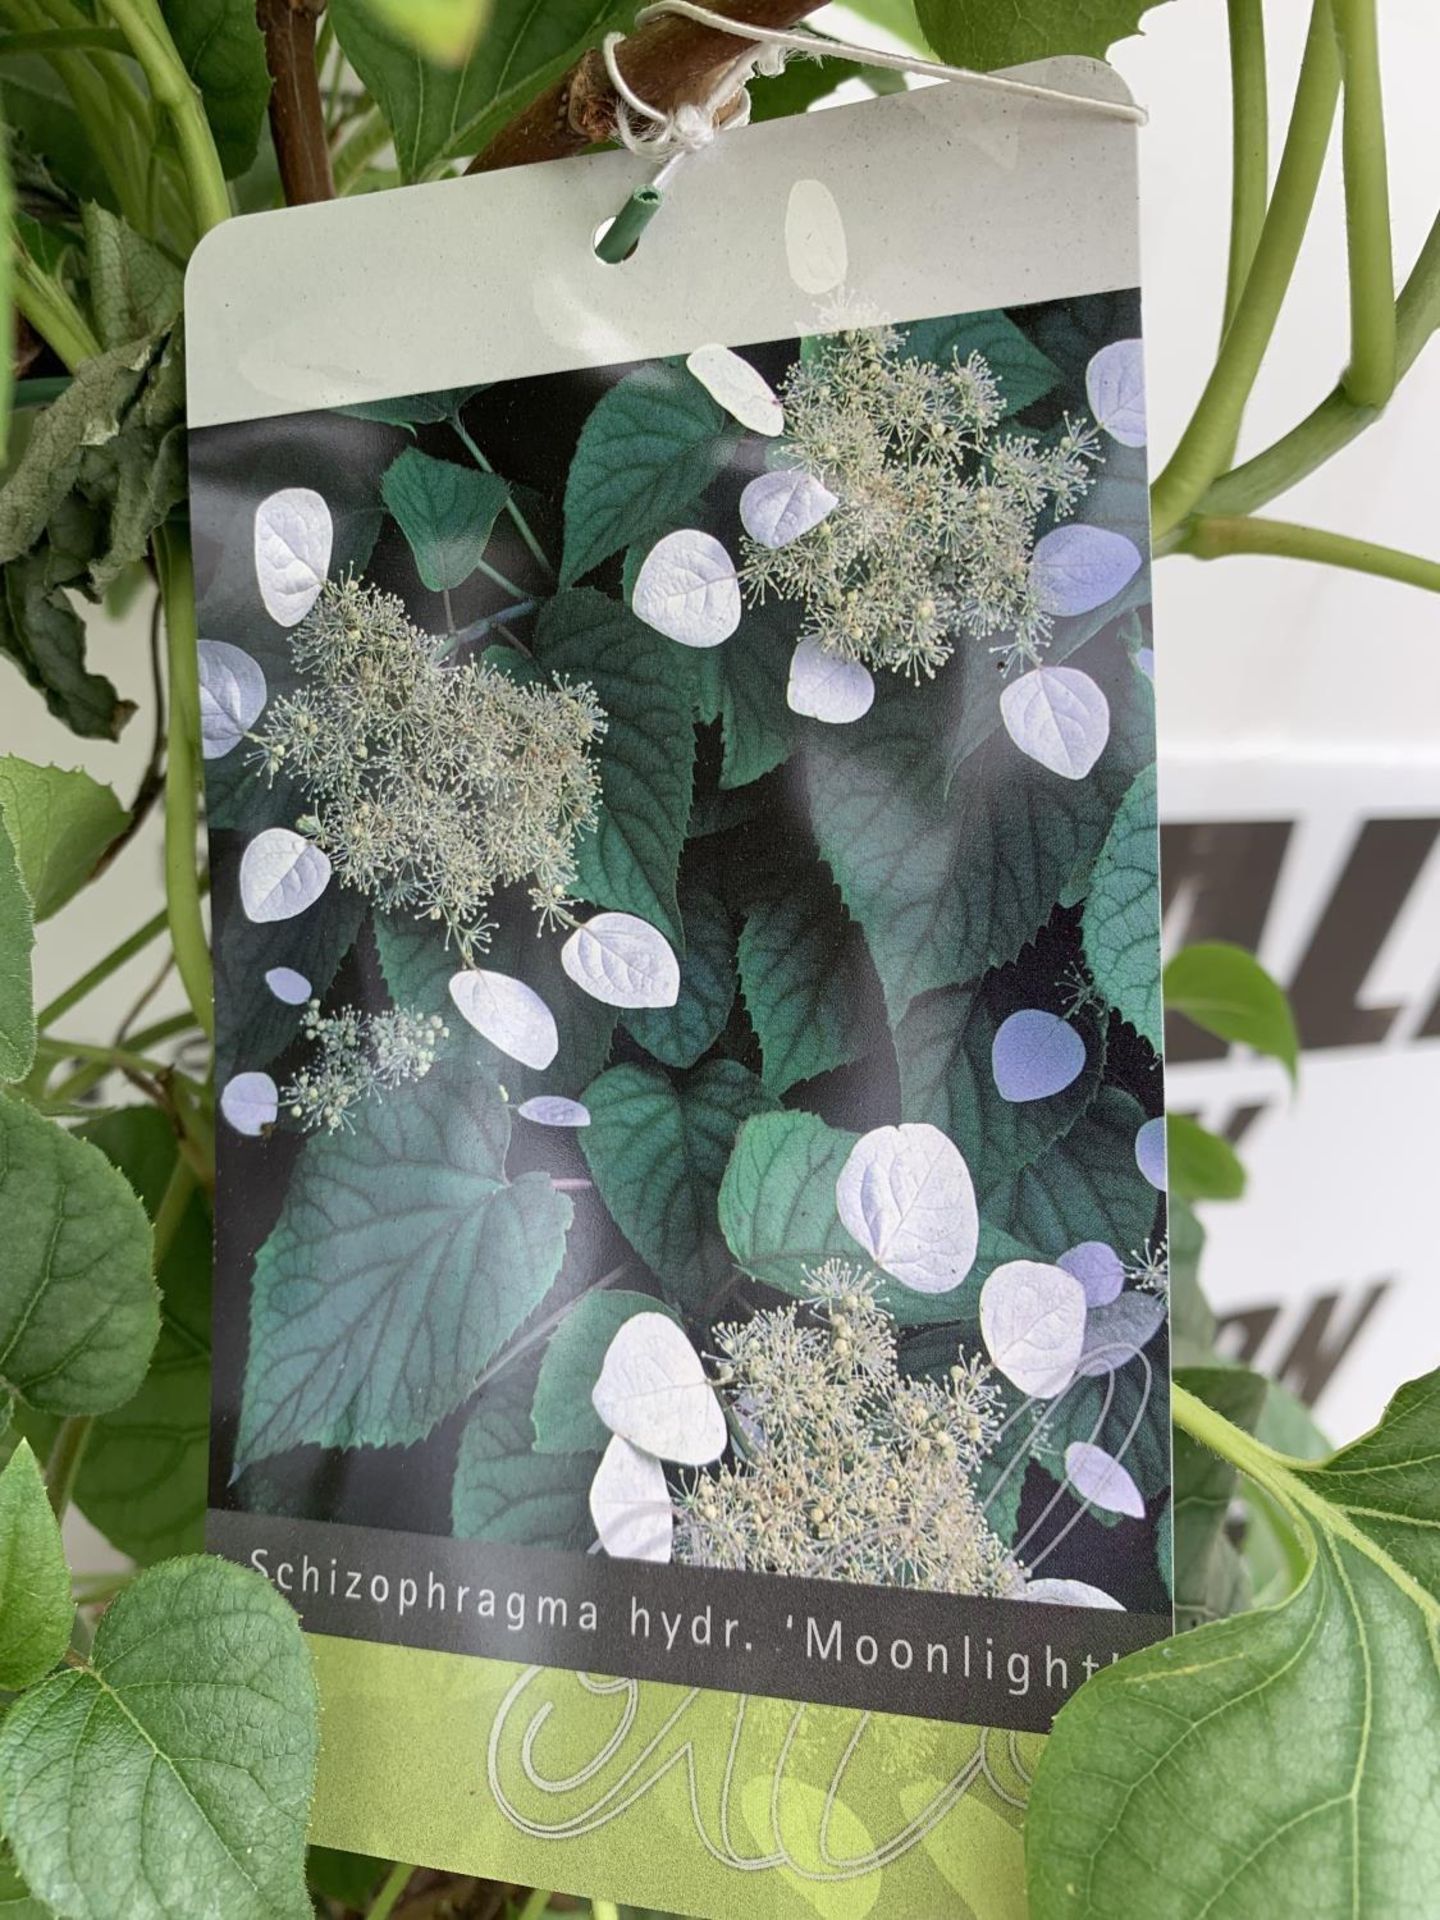 A SCHIZOPHRAGMA HYDRANGEA 'MOONLIGHT' IN A 7.5 LTR POT 120CM IN HEIGHT PLUS VAT - Image 8 of 8